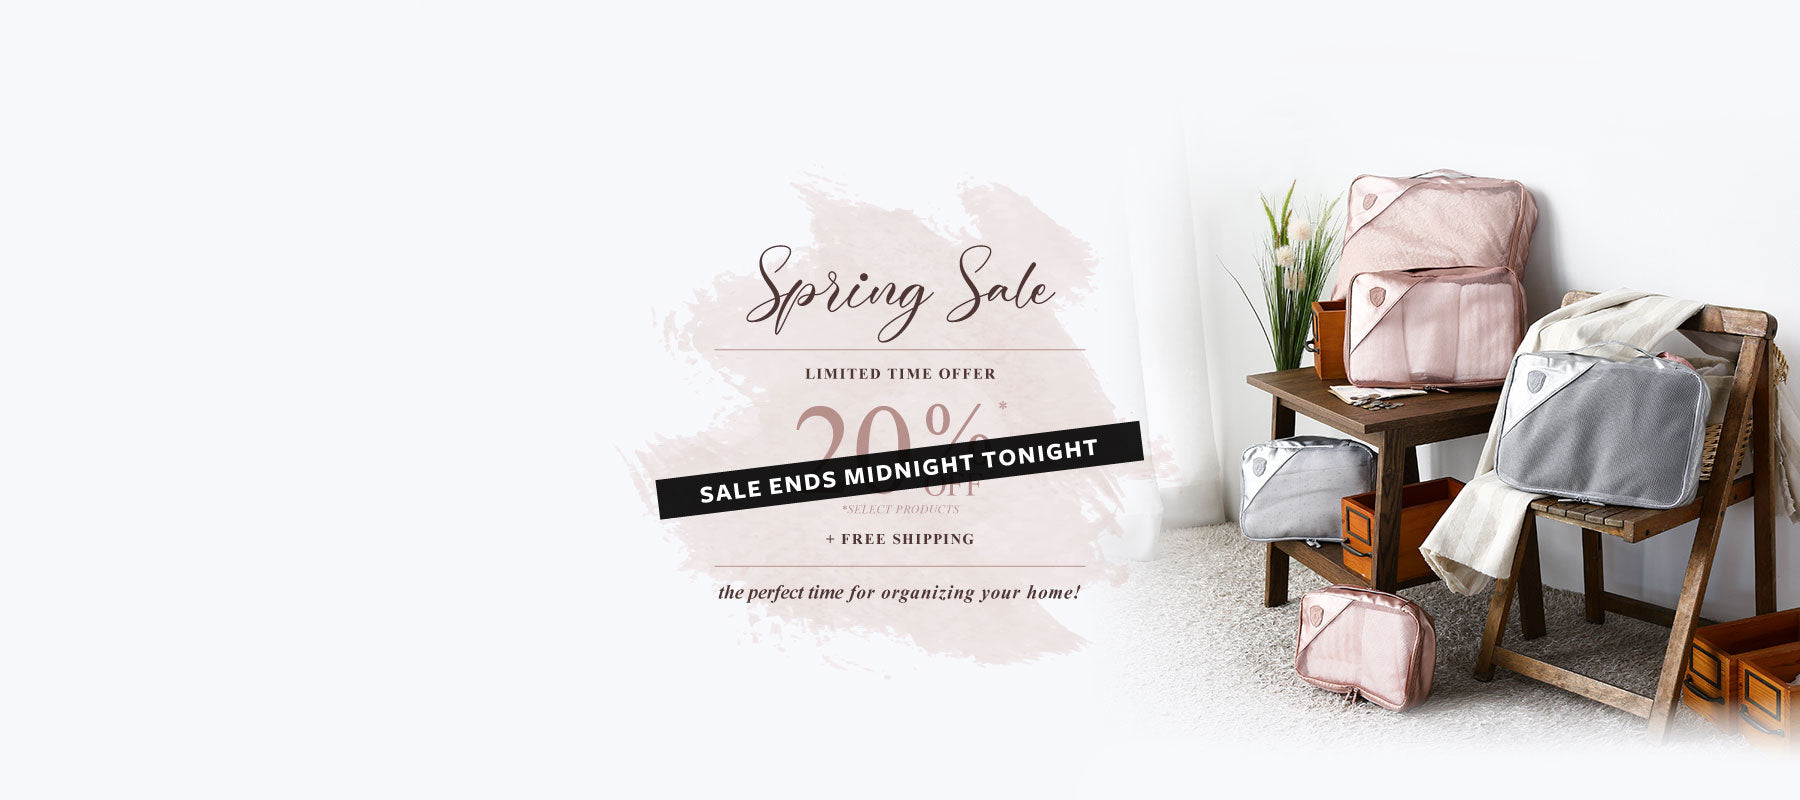 Spring Sale - By Price: Highest to Lowest